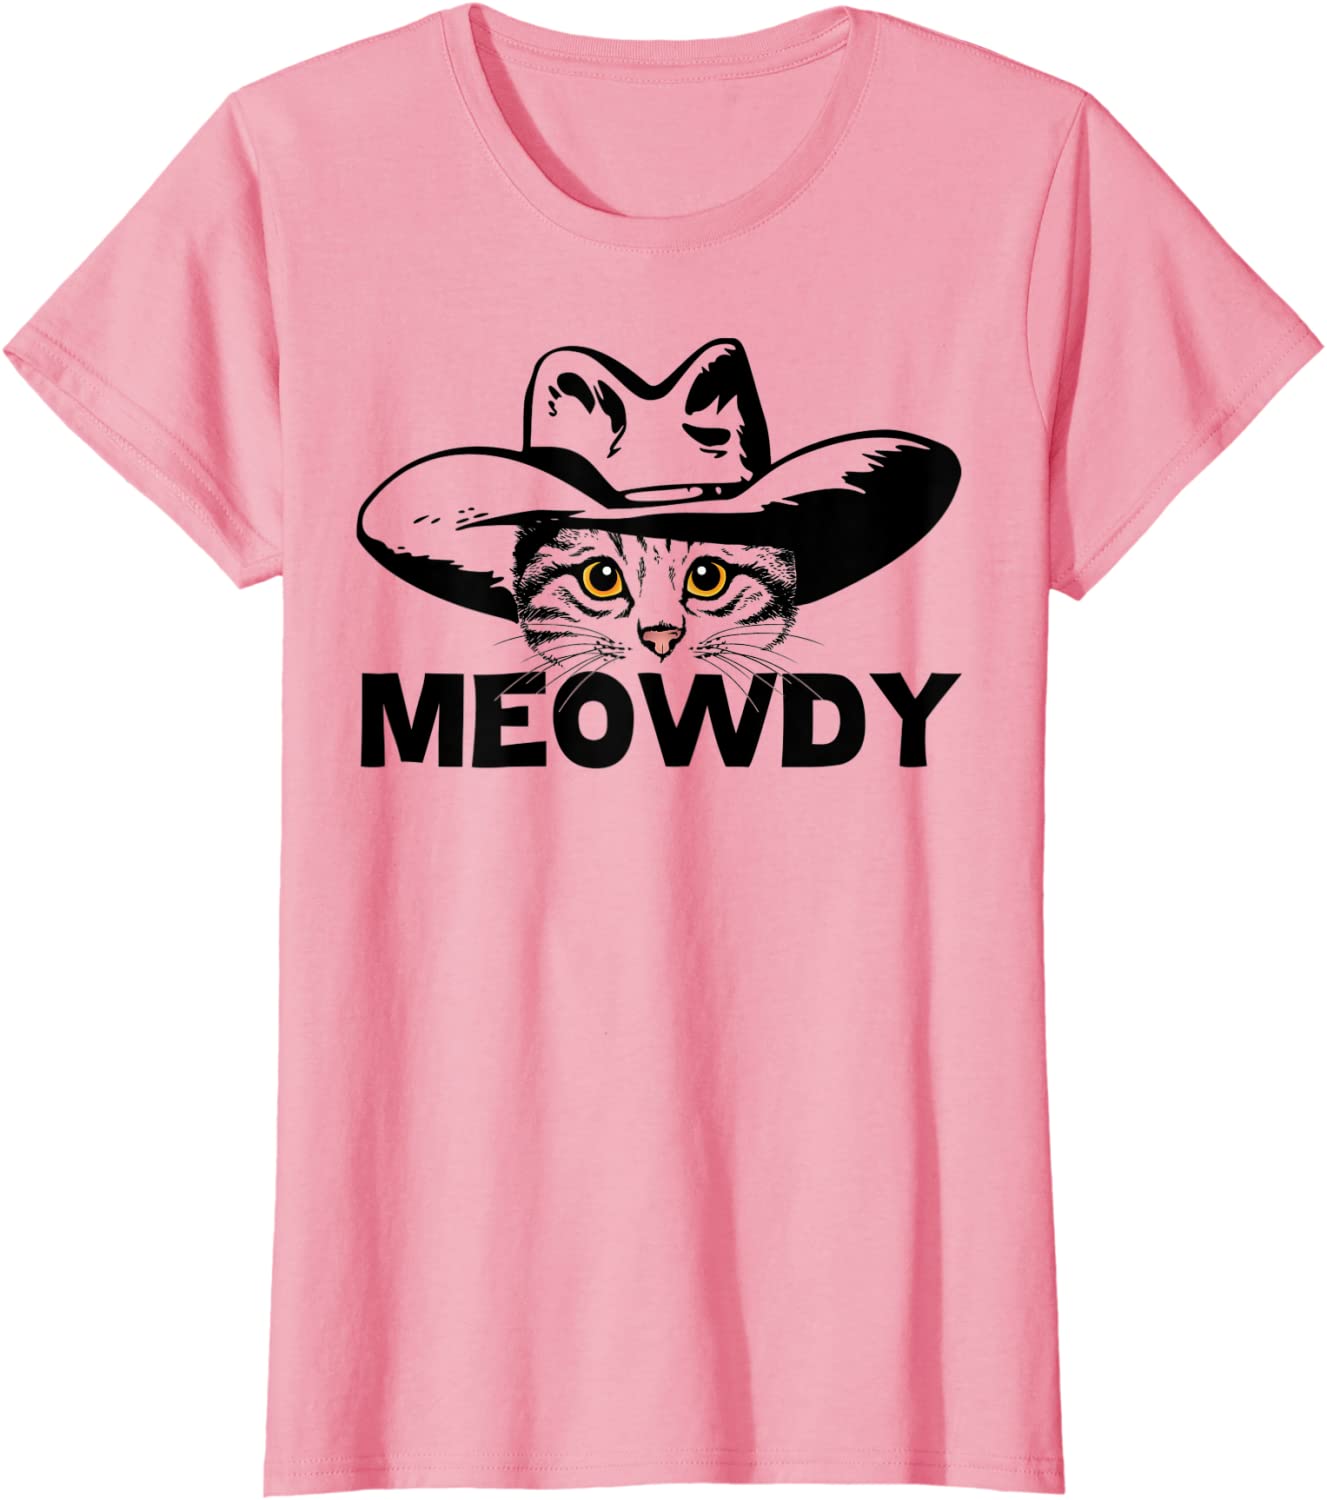 Funny Mashup Between Meow and Howdy Cat Meme T Shirt